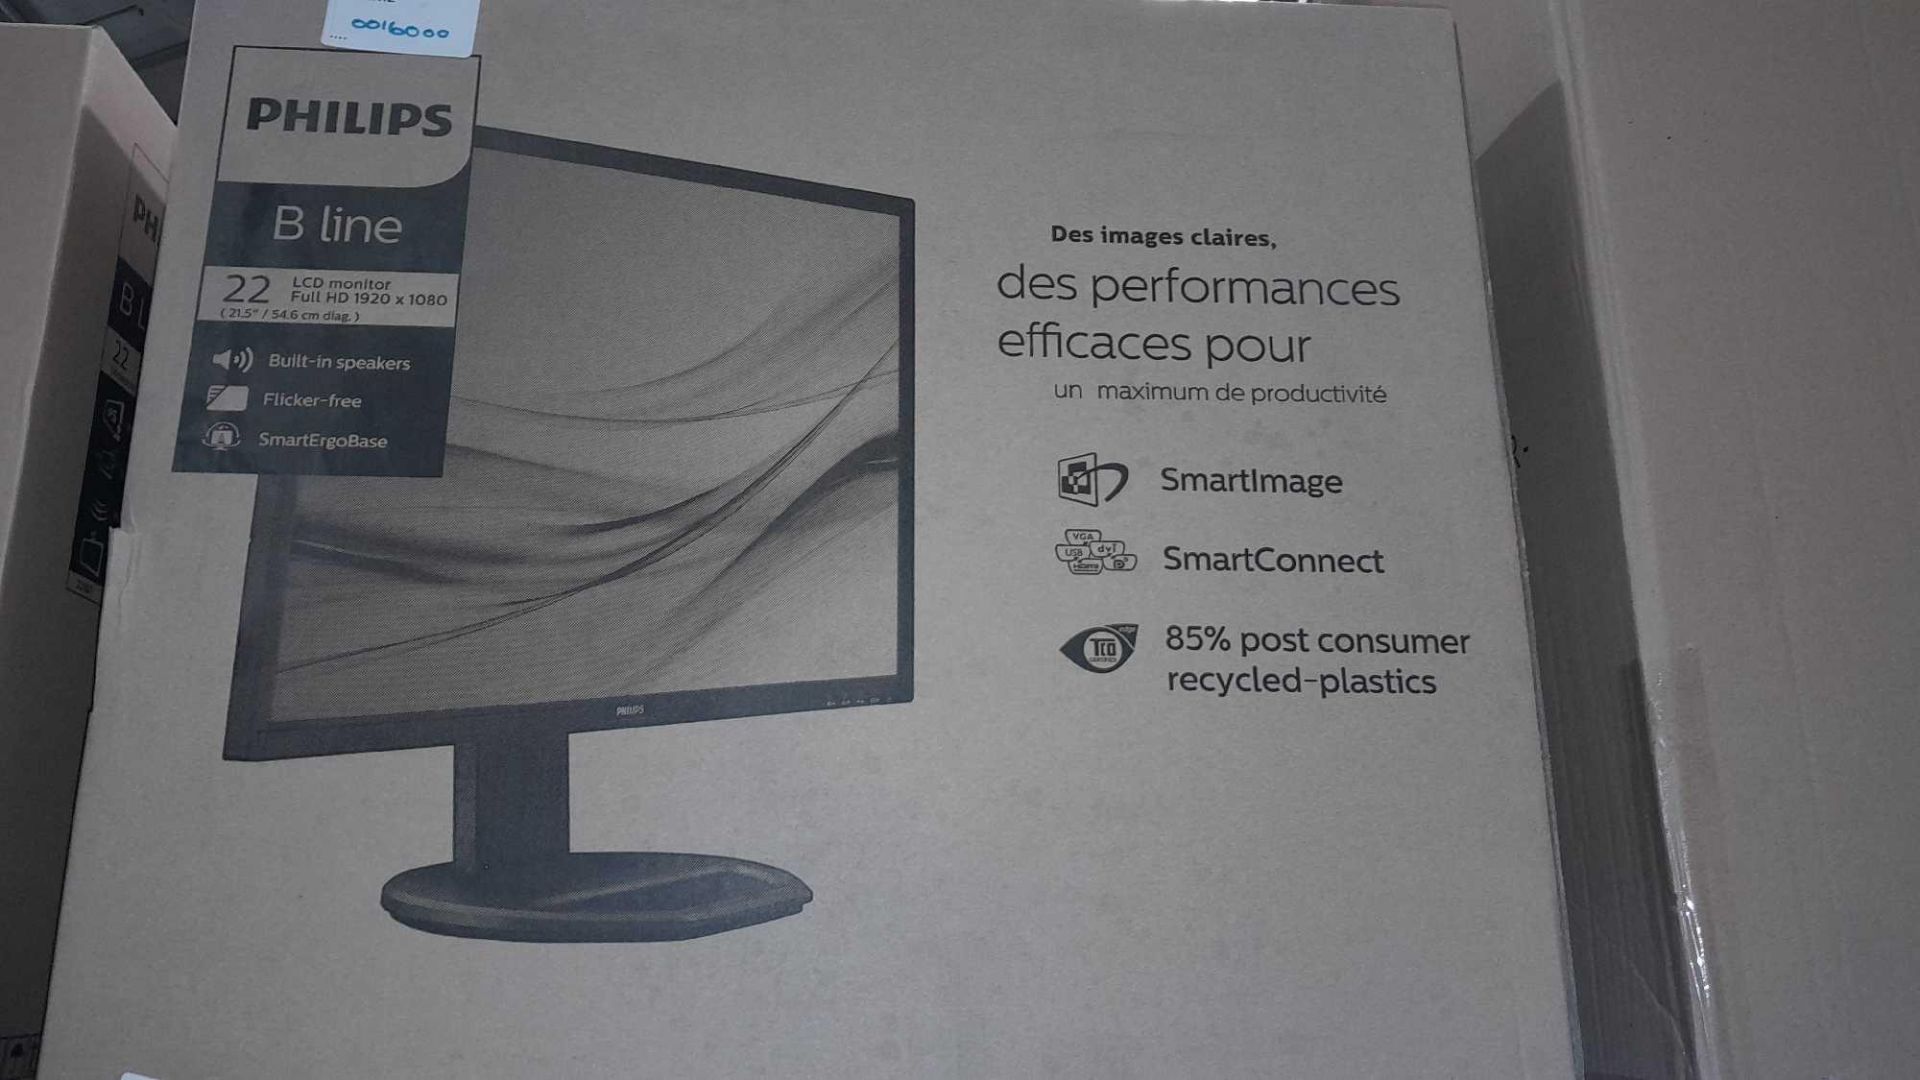 RRP £165 A Boxed Brand New Manufacturer Sealed Philips 221B8L 22 Lcd Bline Monitor - Image 2 of 2